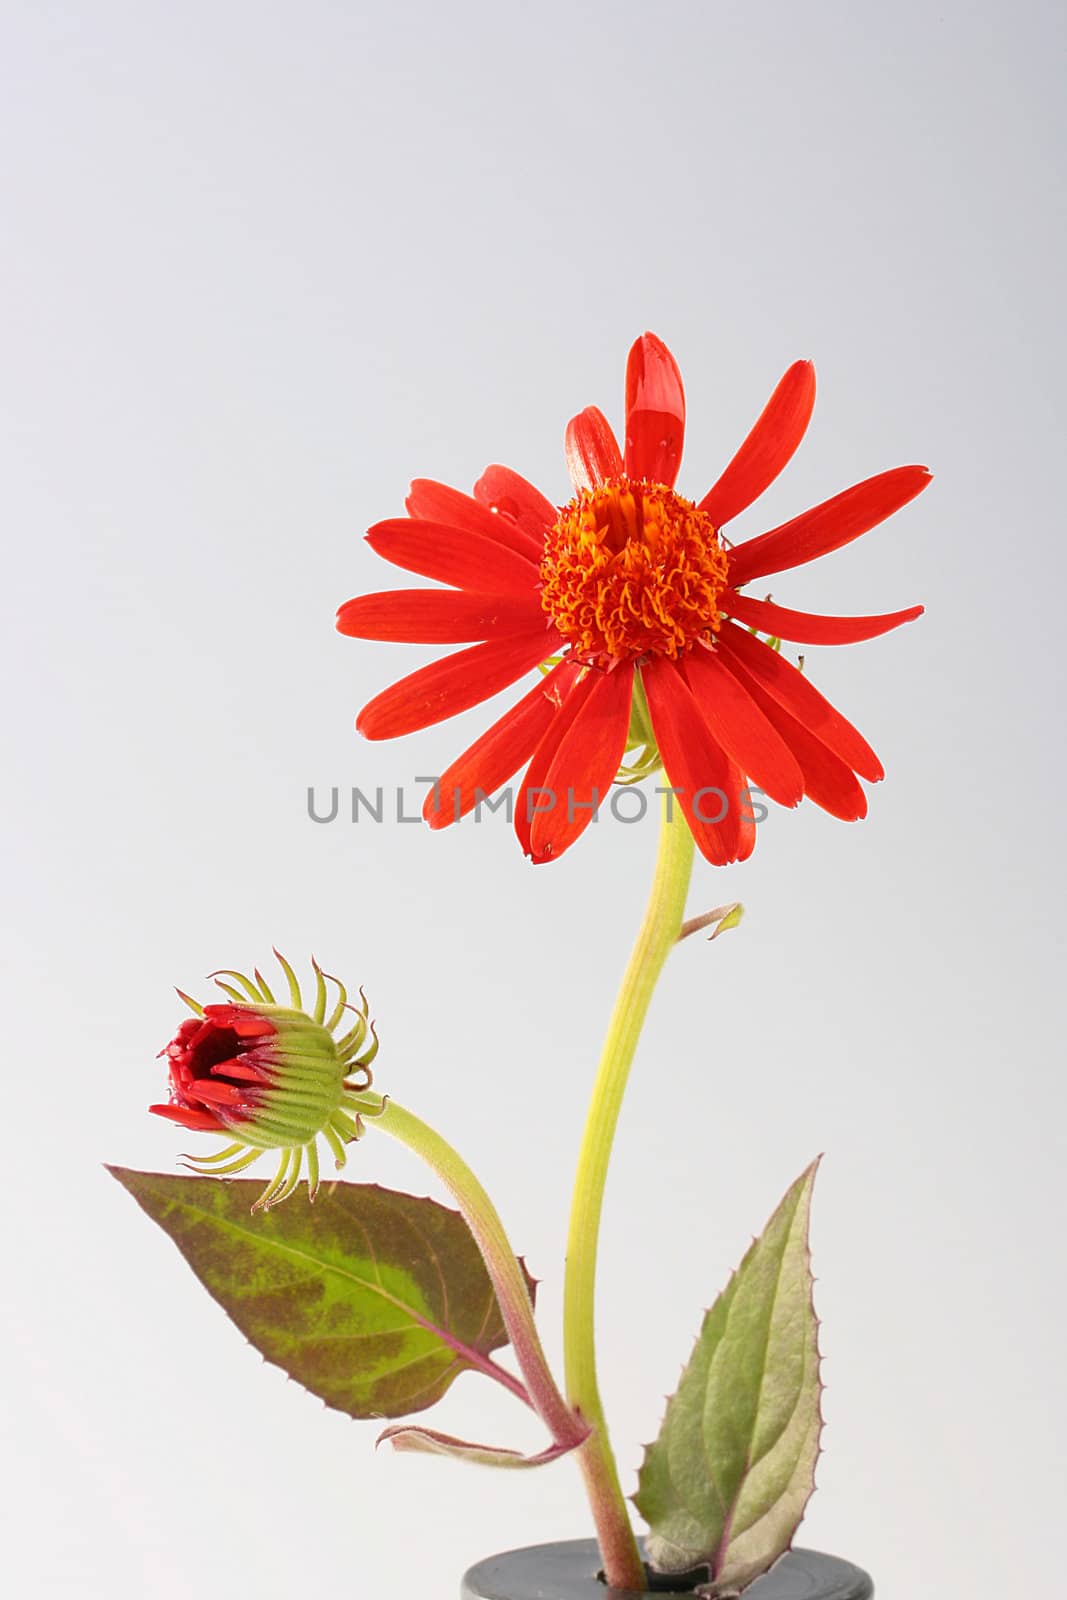 Flower with a bud by VIPDesignUSA